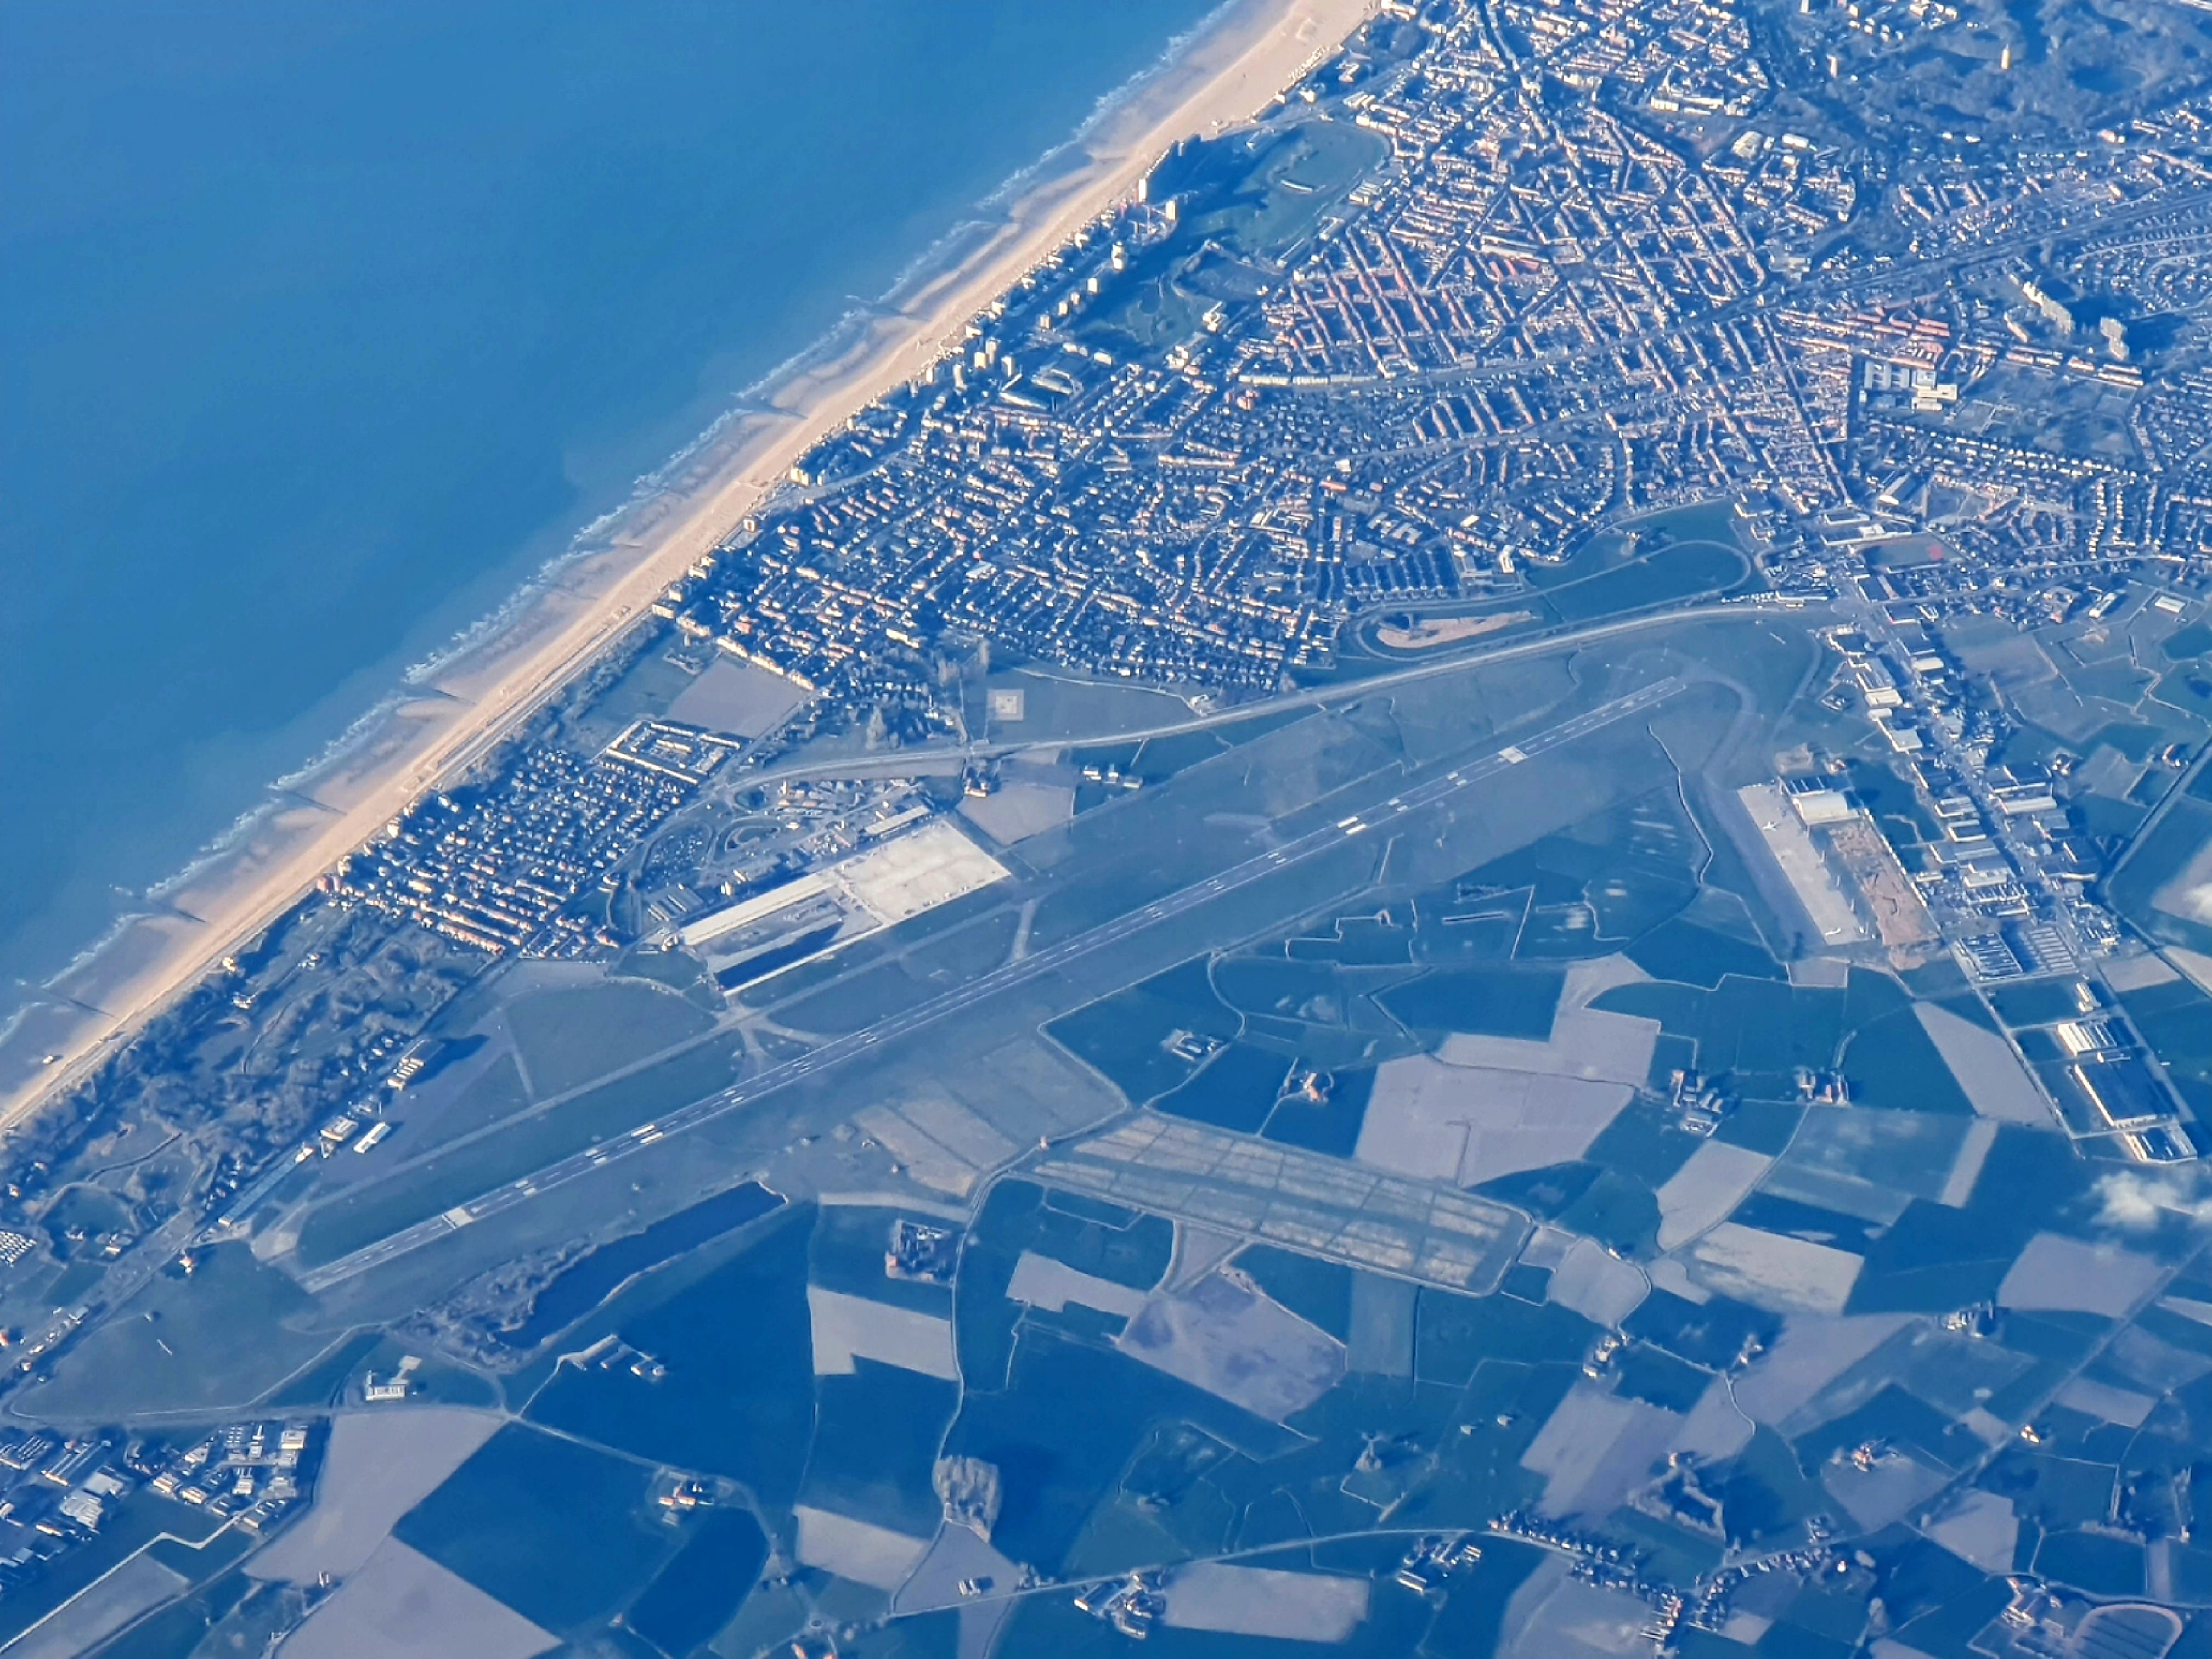 Ostend-Bruges International Airport Aerial View